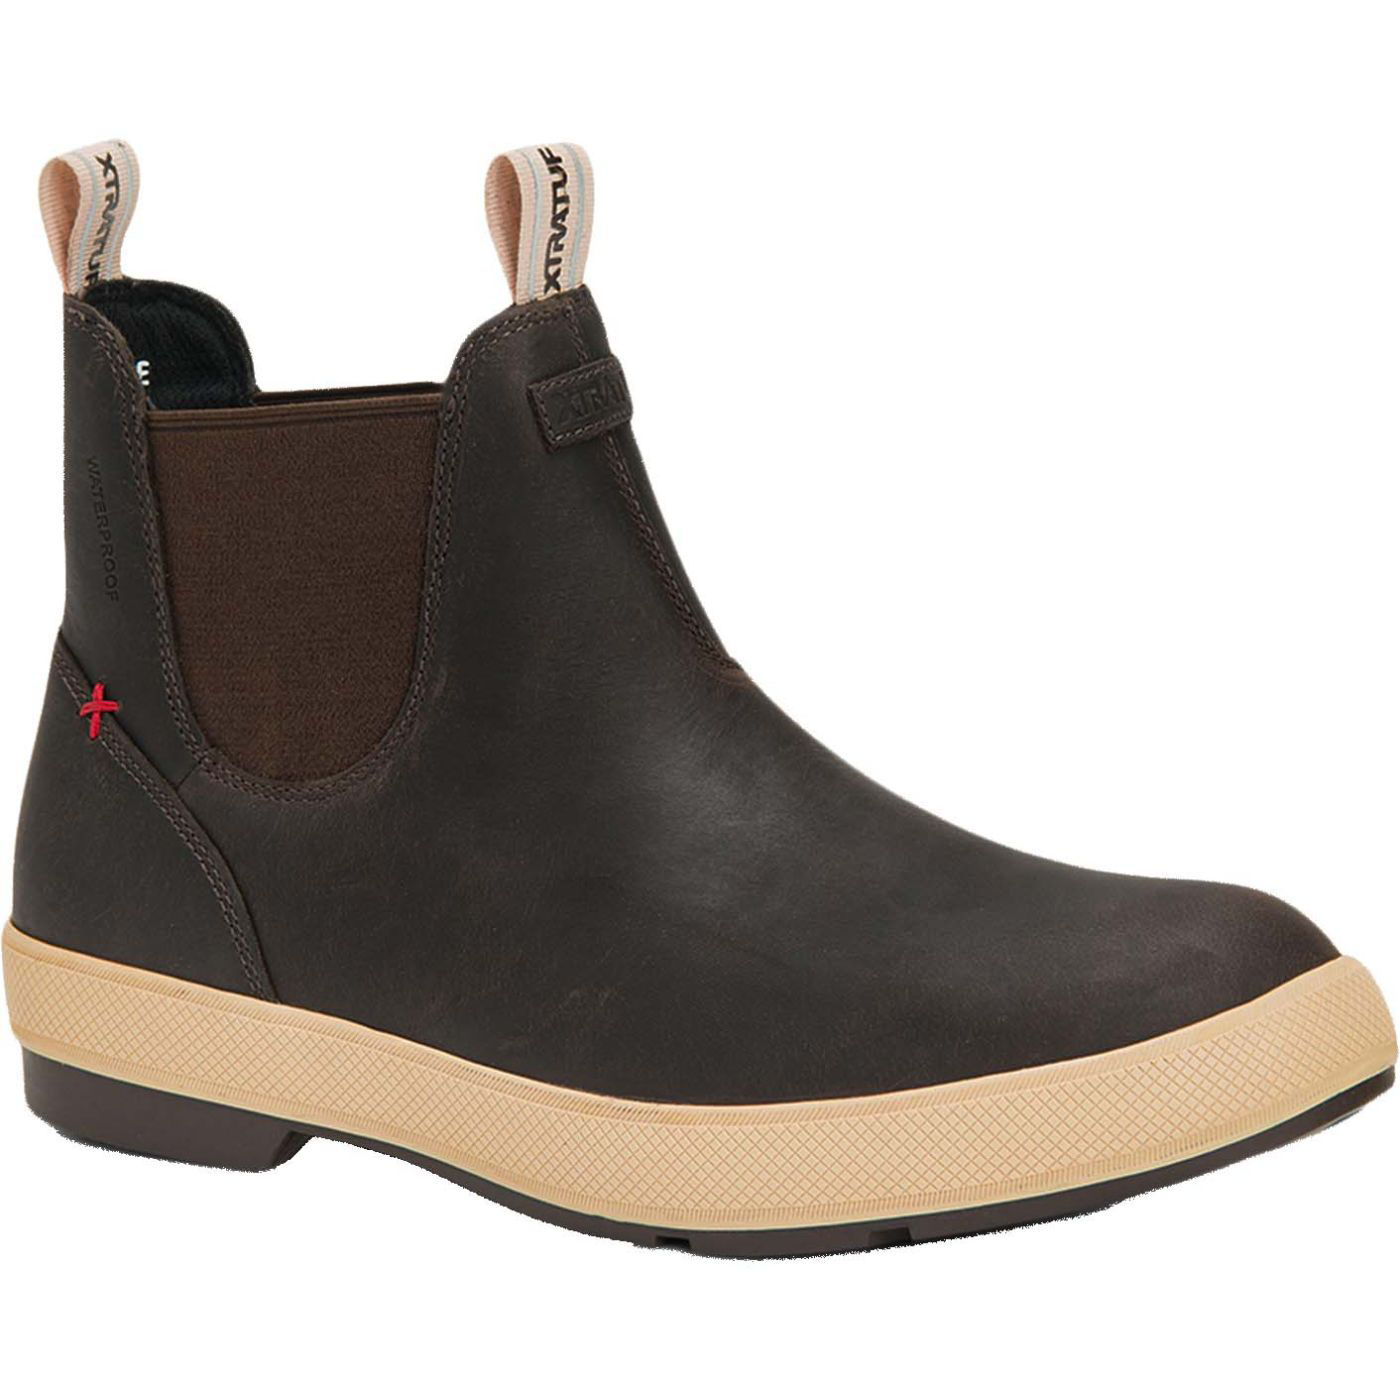 Xtratuf Legacy Leather Chelsea Boots for Men - Brown - 13M